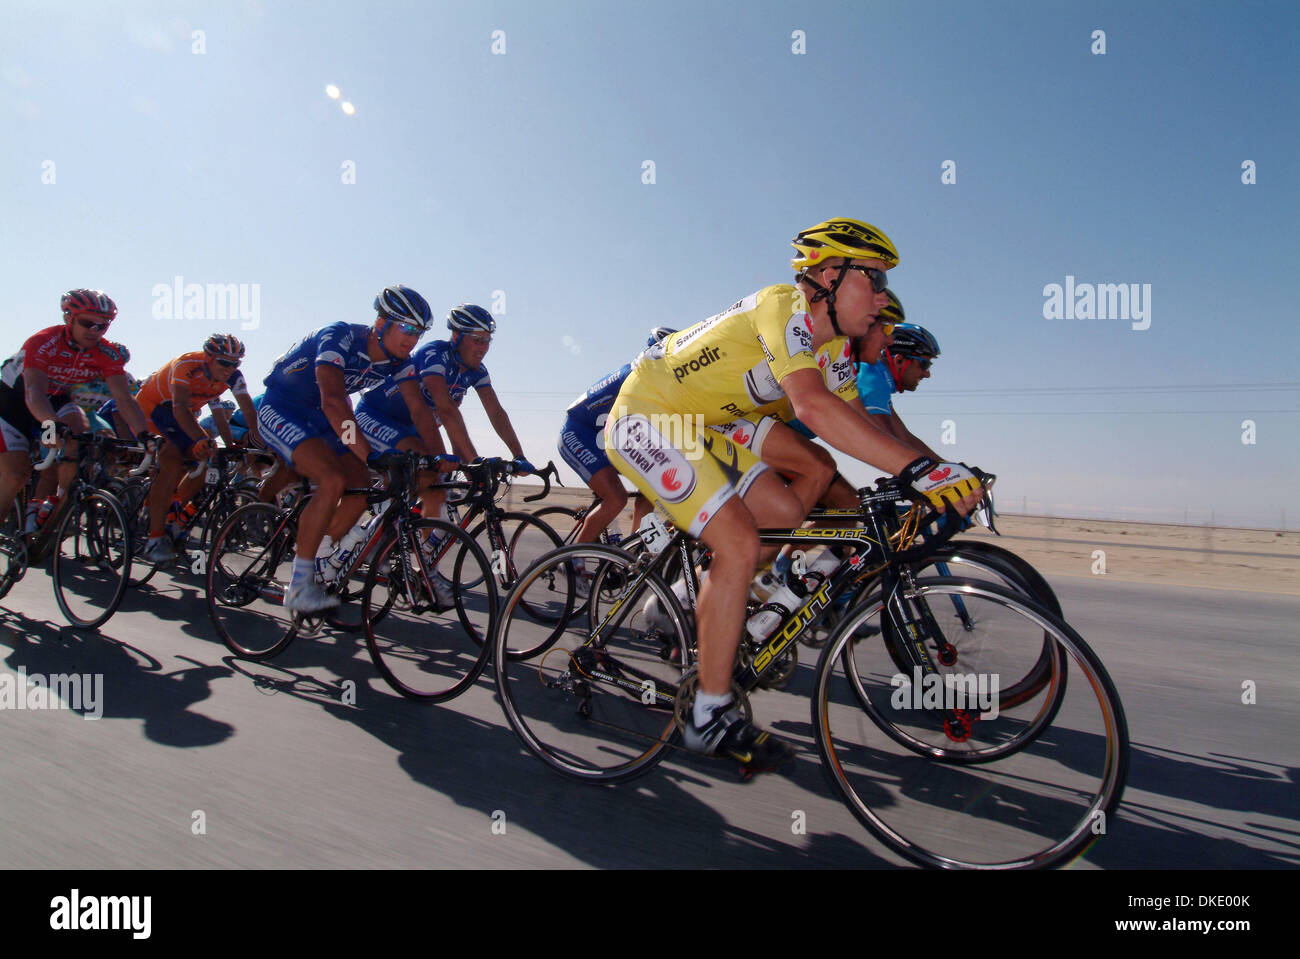 Feb 02, 2007 - Doha, Qatar - Stage 6: Sealine Beach Resort to Doha Corniche - 134 kms. For the 4th time in 6 days, Tom Boonen, once again, proved that he was the master of sprinting by claiming the final stage of the Tour of Qatar. His Quickstep team mate, Wilfried Cretskens, wins the overall classification of the event. The Tour of Qatar 2007 took place from January 28 to February Stock Photo